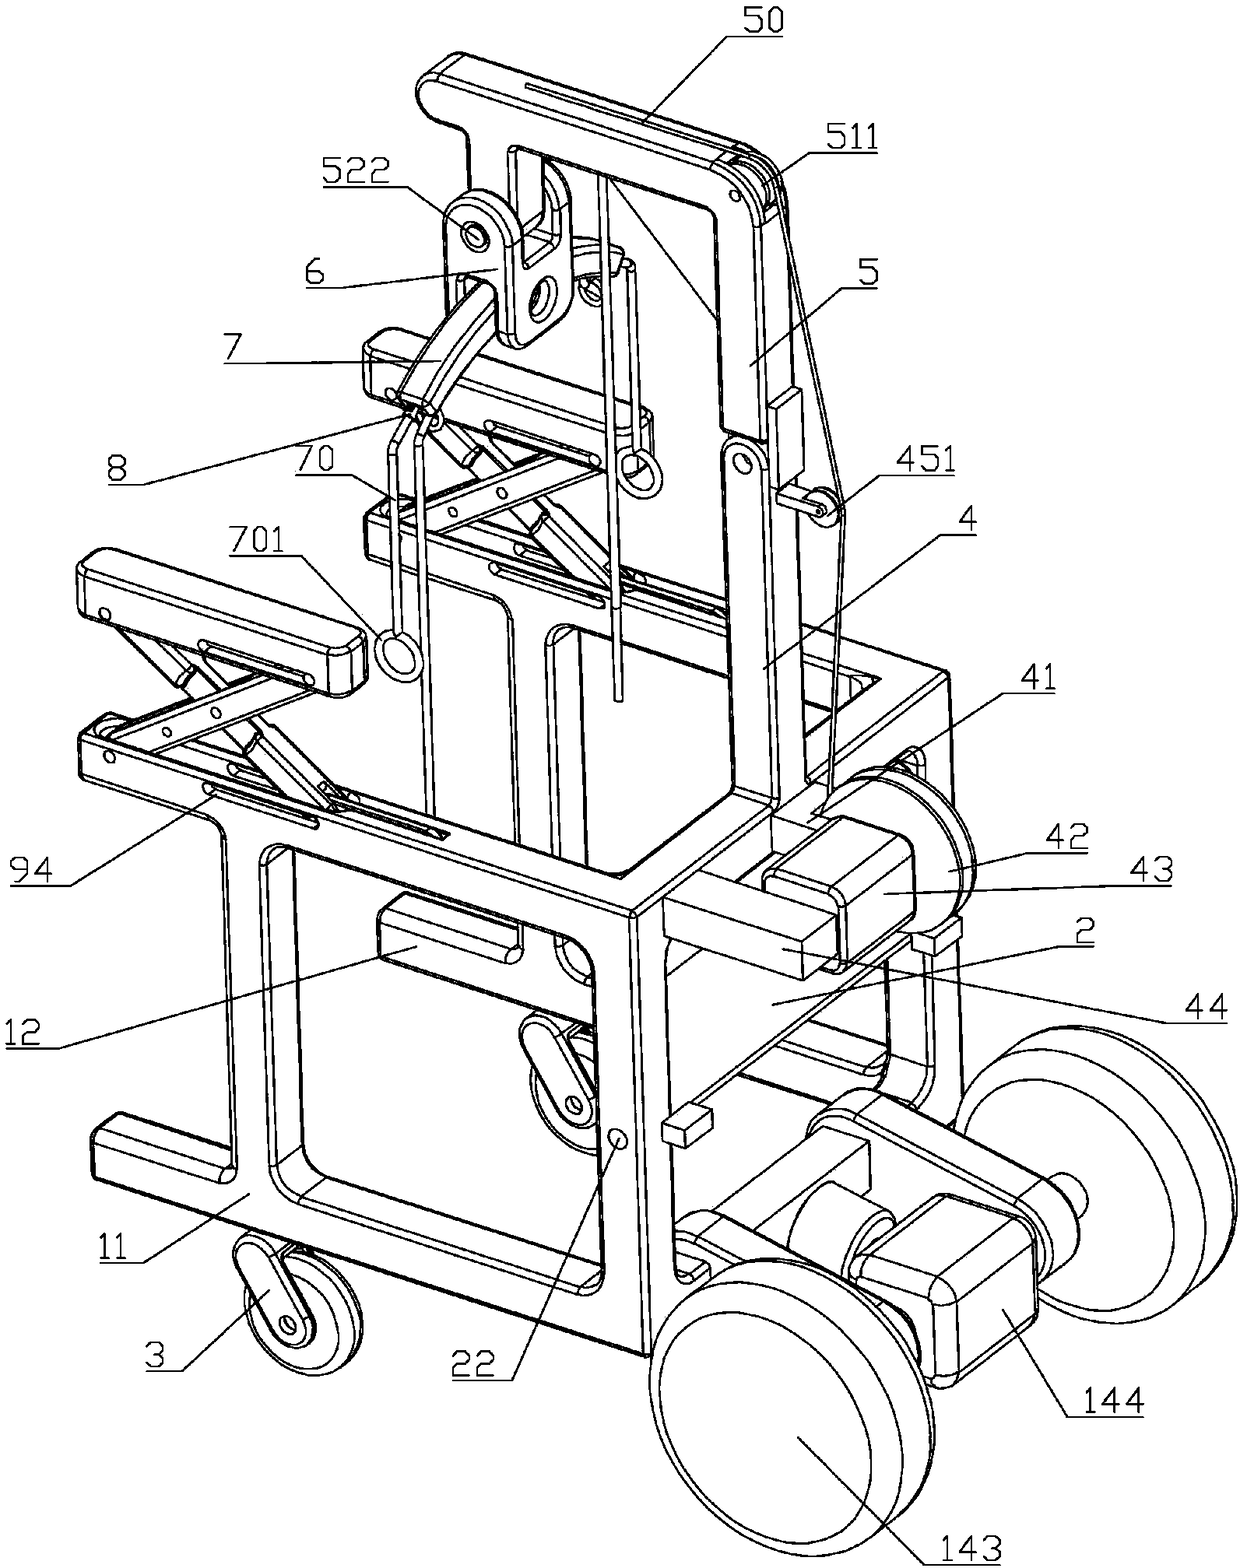 Weight reduction device for rehabilitation training